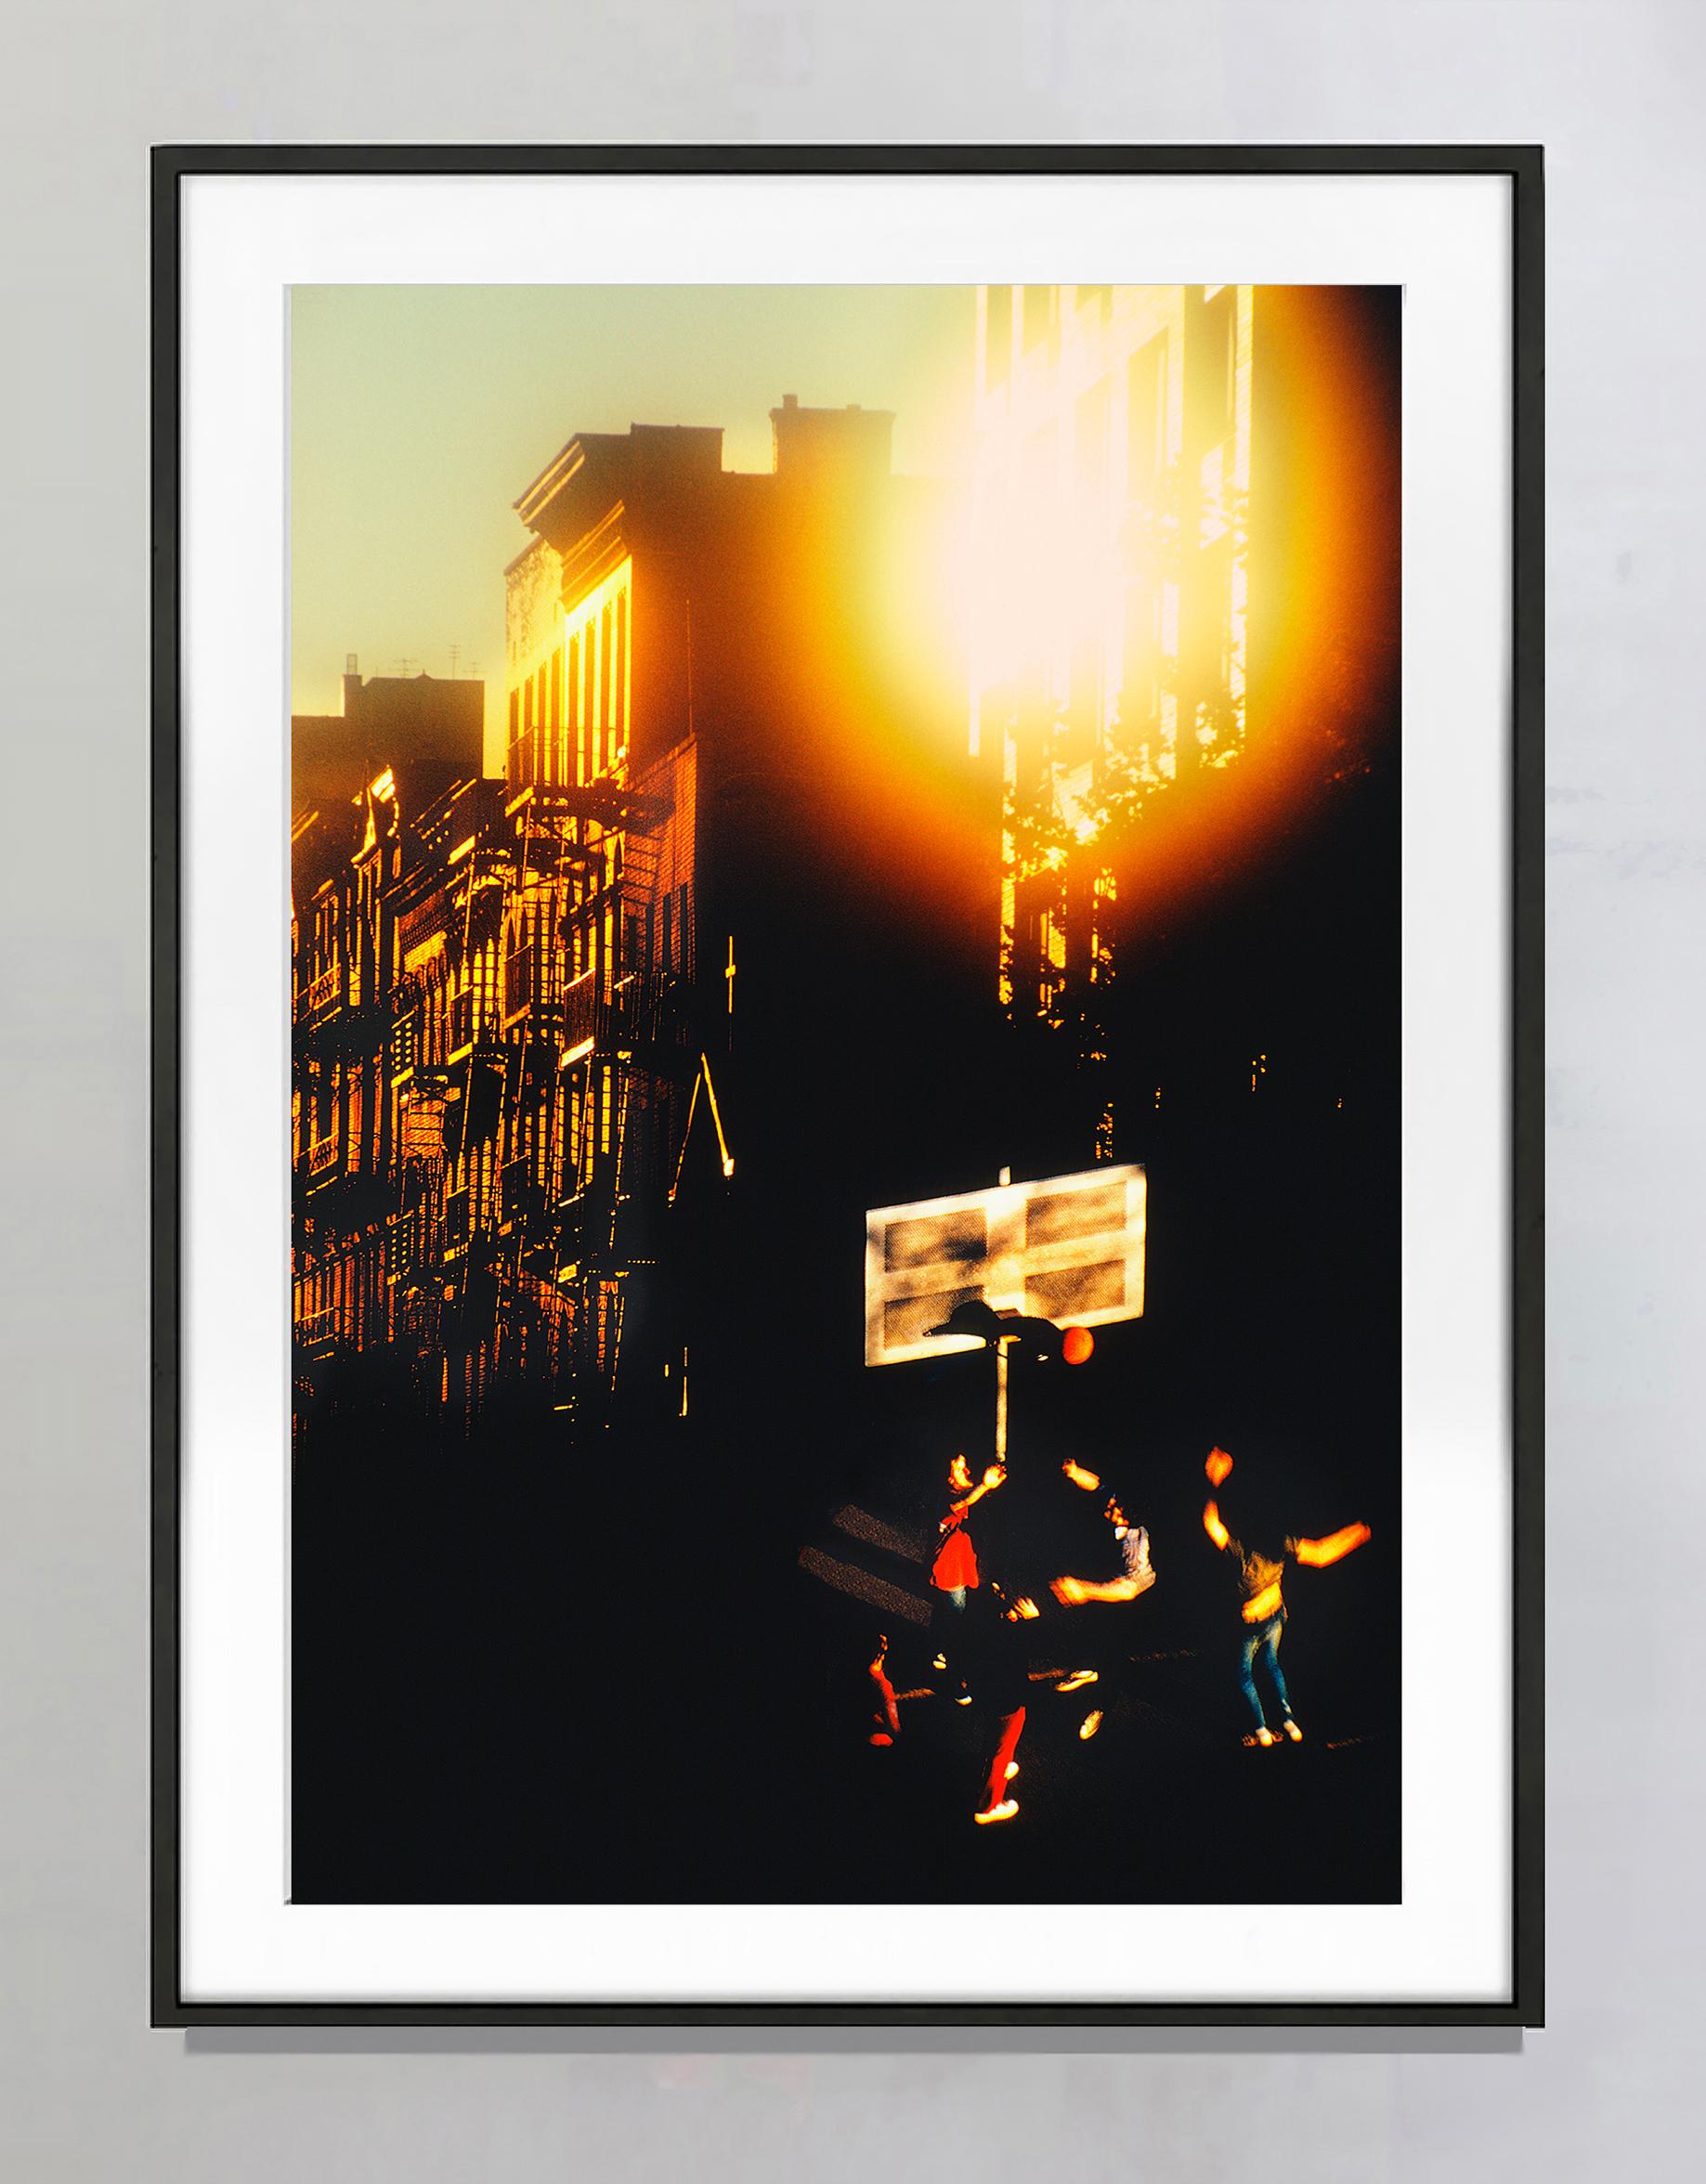 Street Basketball with Angelic Light Burst in Gold - Photograph by Mitchell Funk